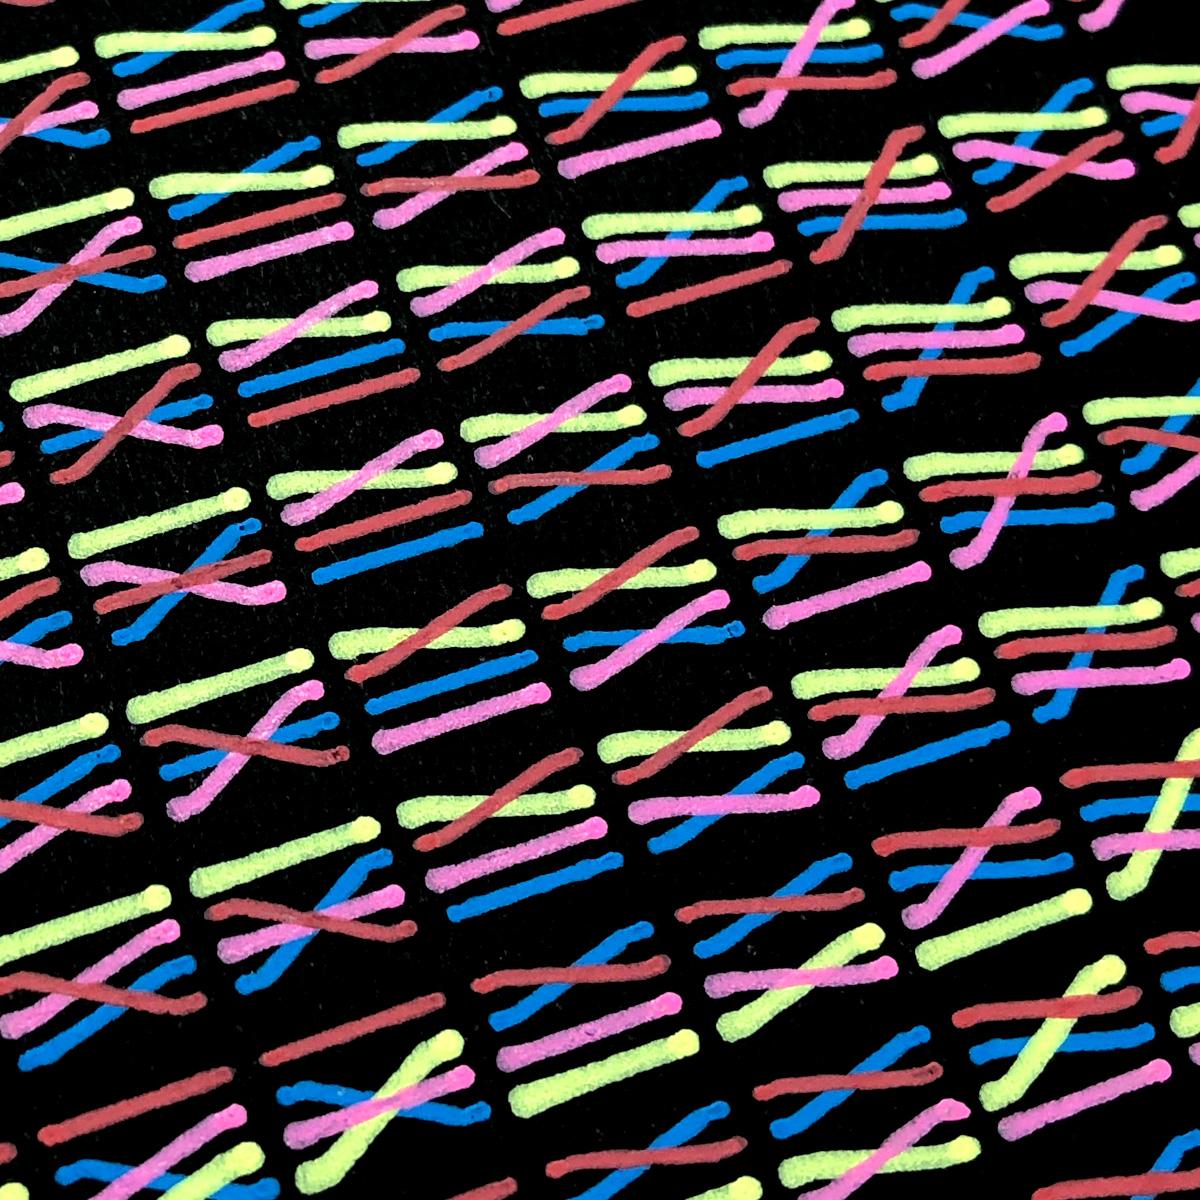 A grid of grouped lines (wires), each with four colours, and each moving diagonally or straight across in unique patterns